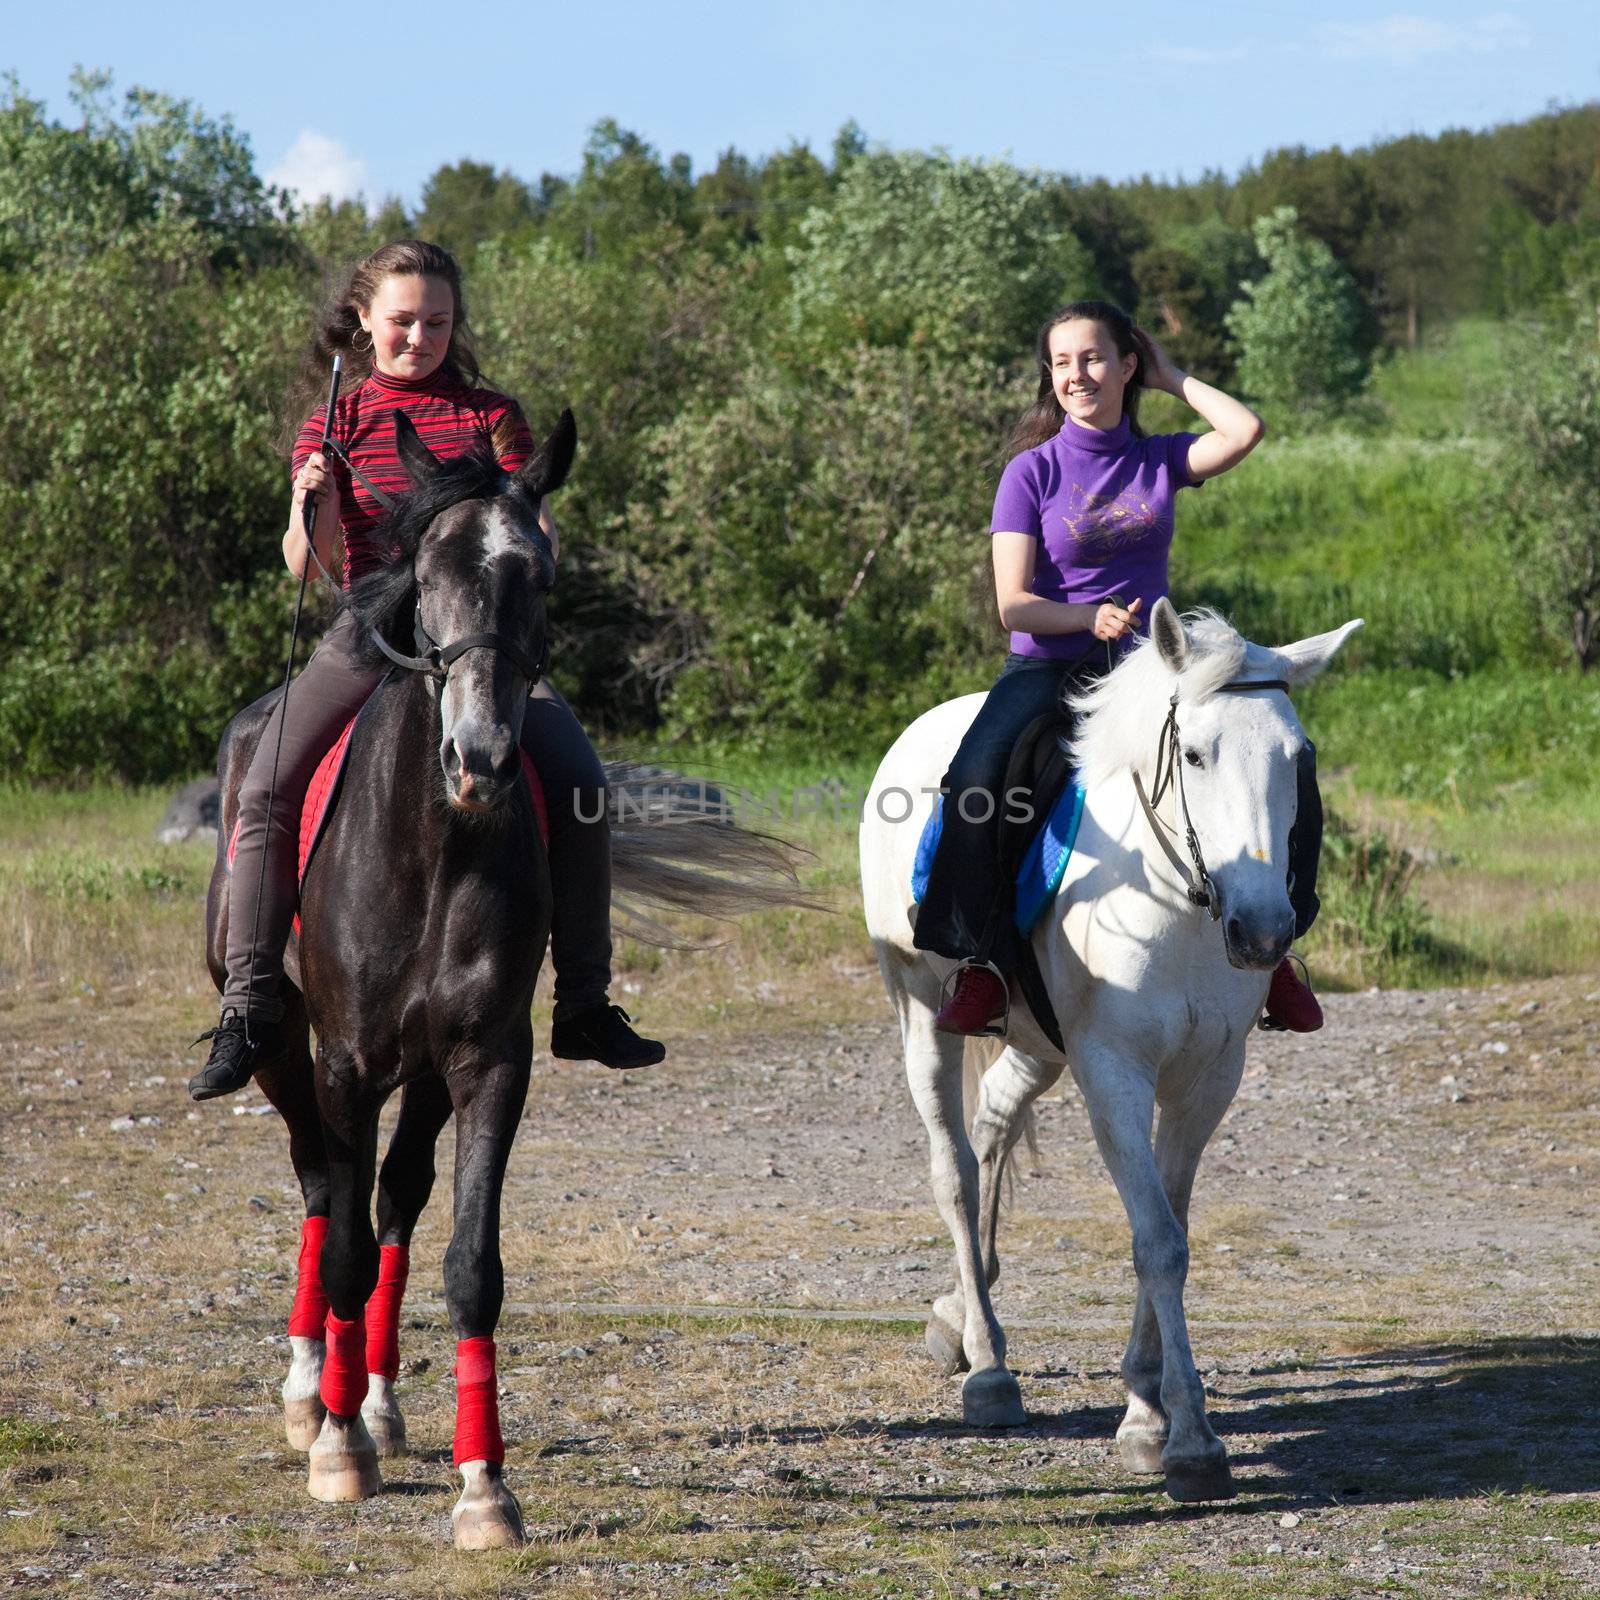 Two girls on horseback, on a clear sunny day